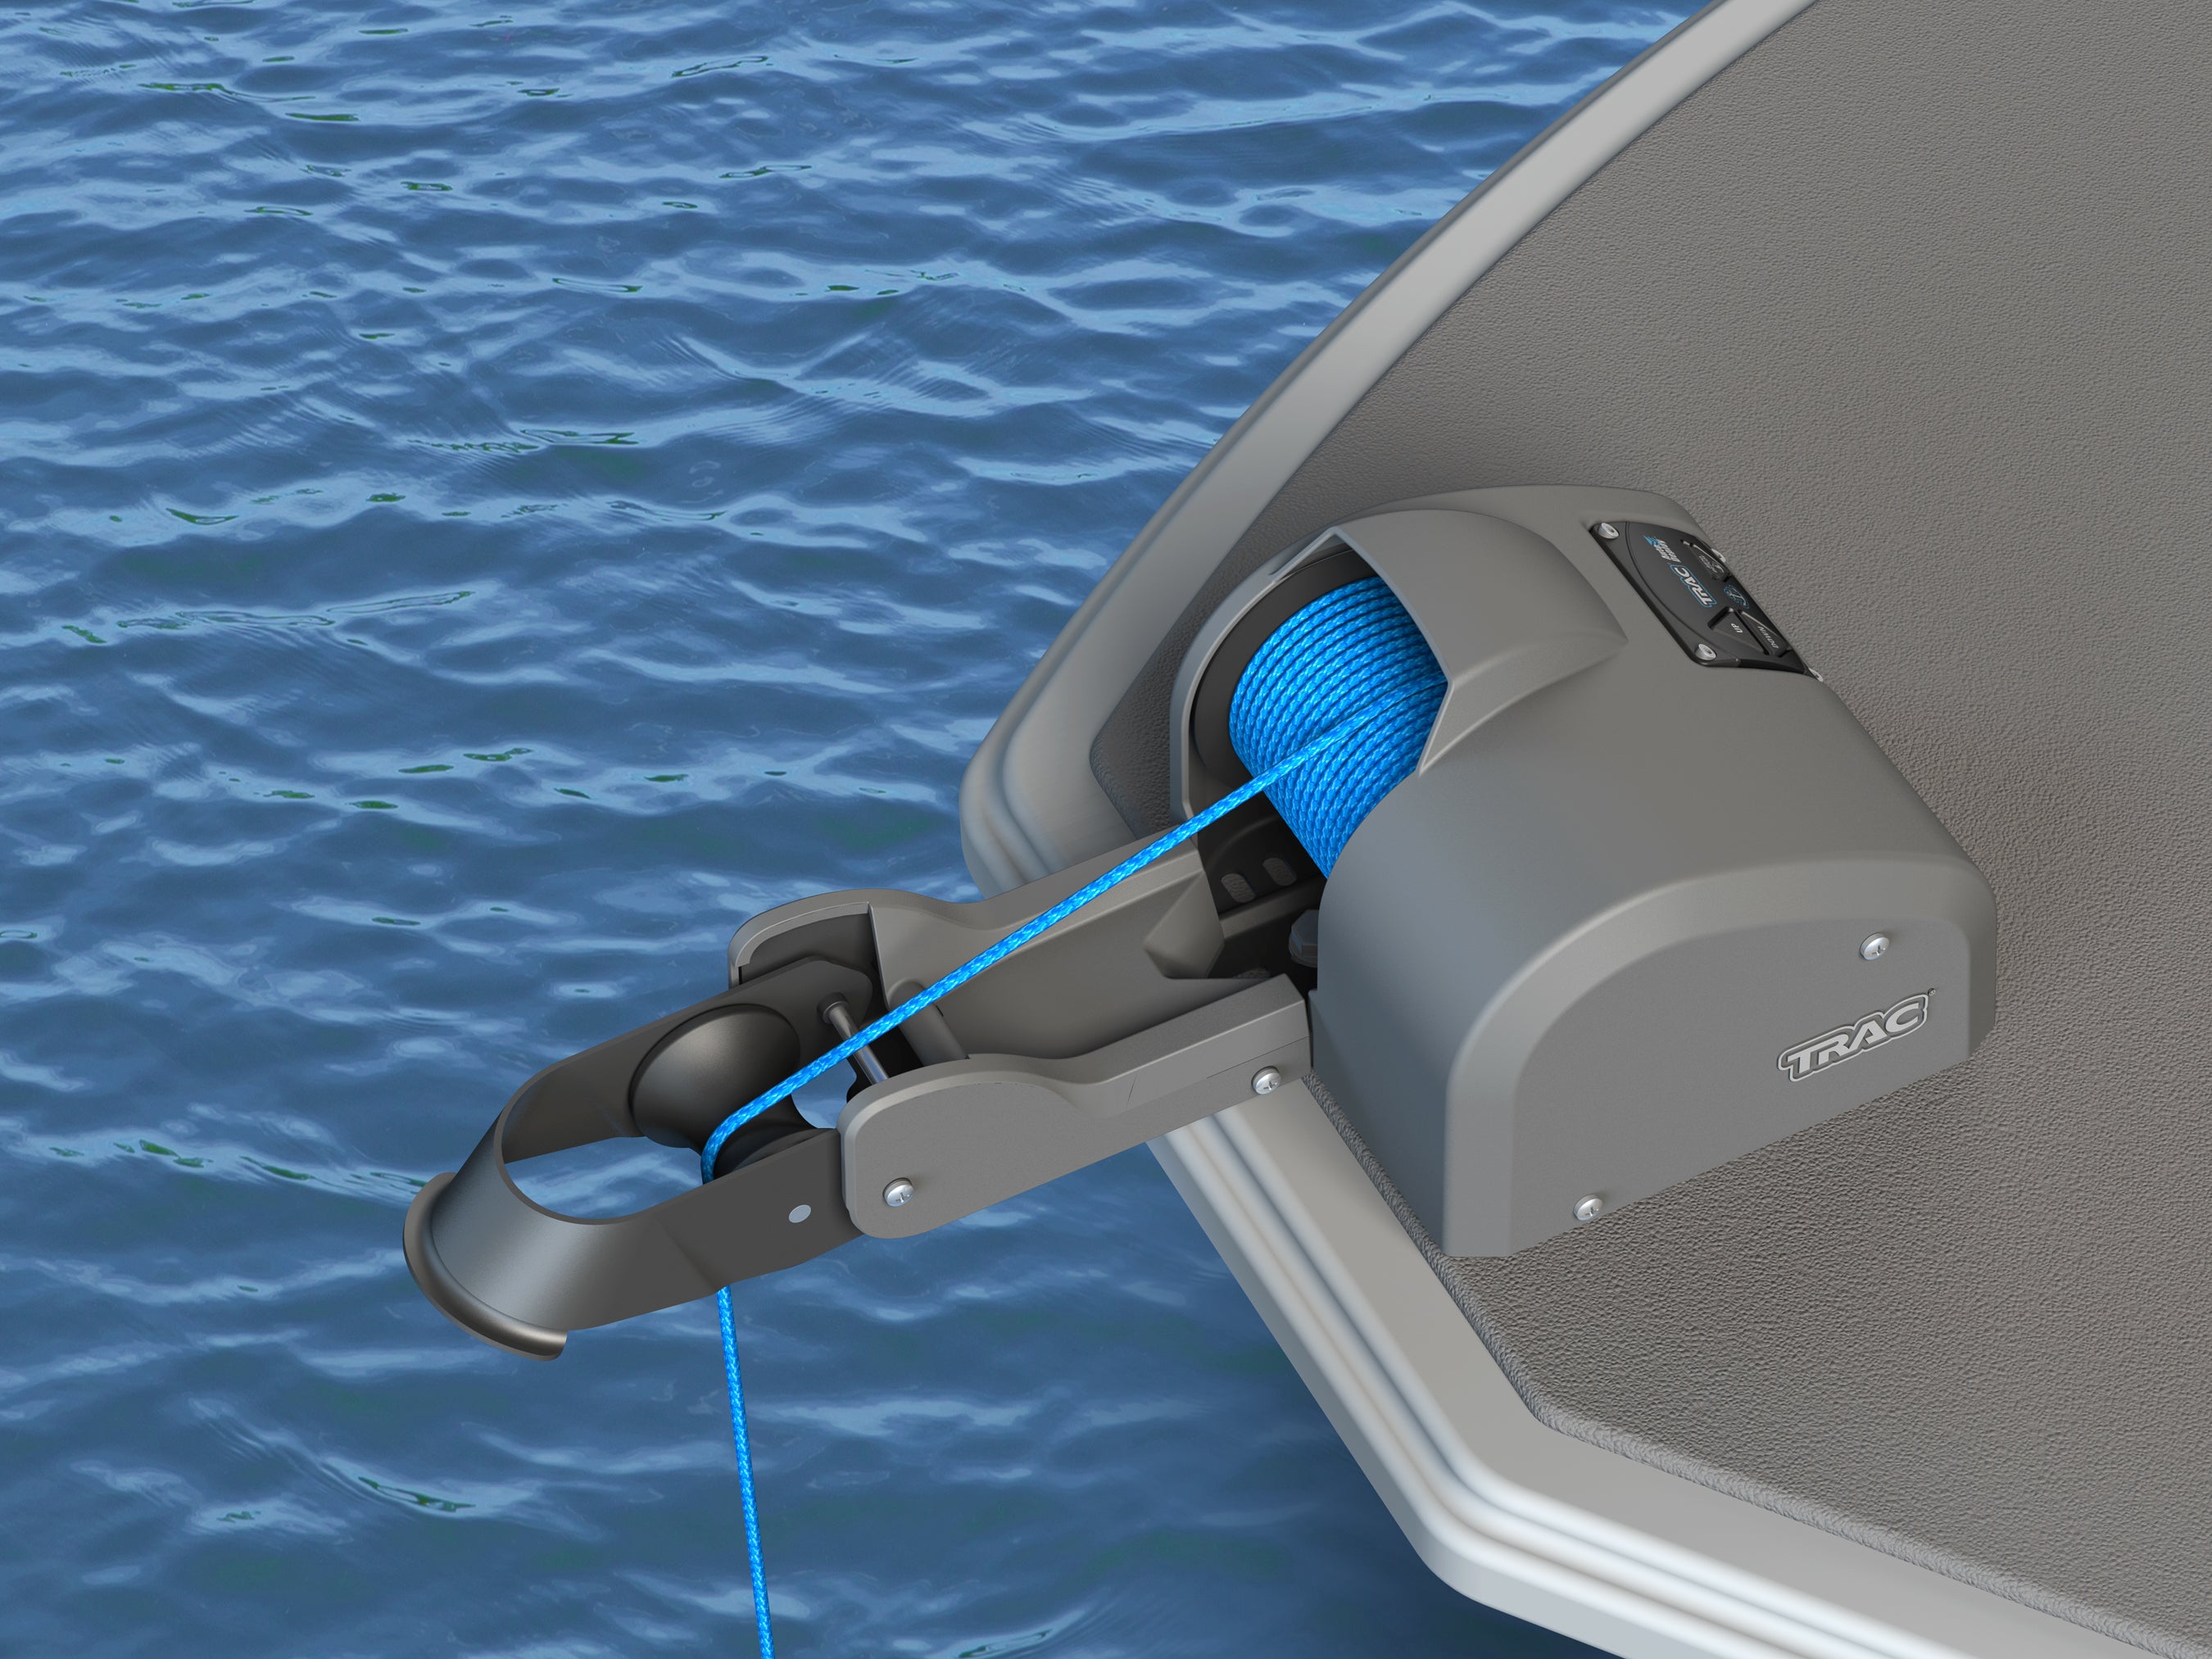 How to Install an electric anchor on boat (Trac fisherman 25) 